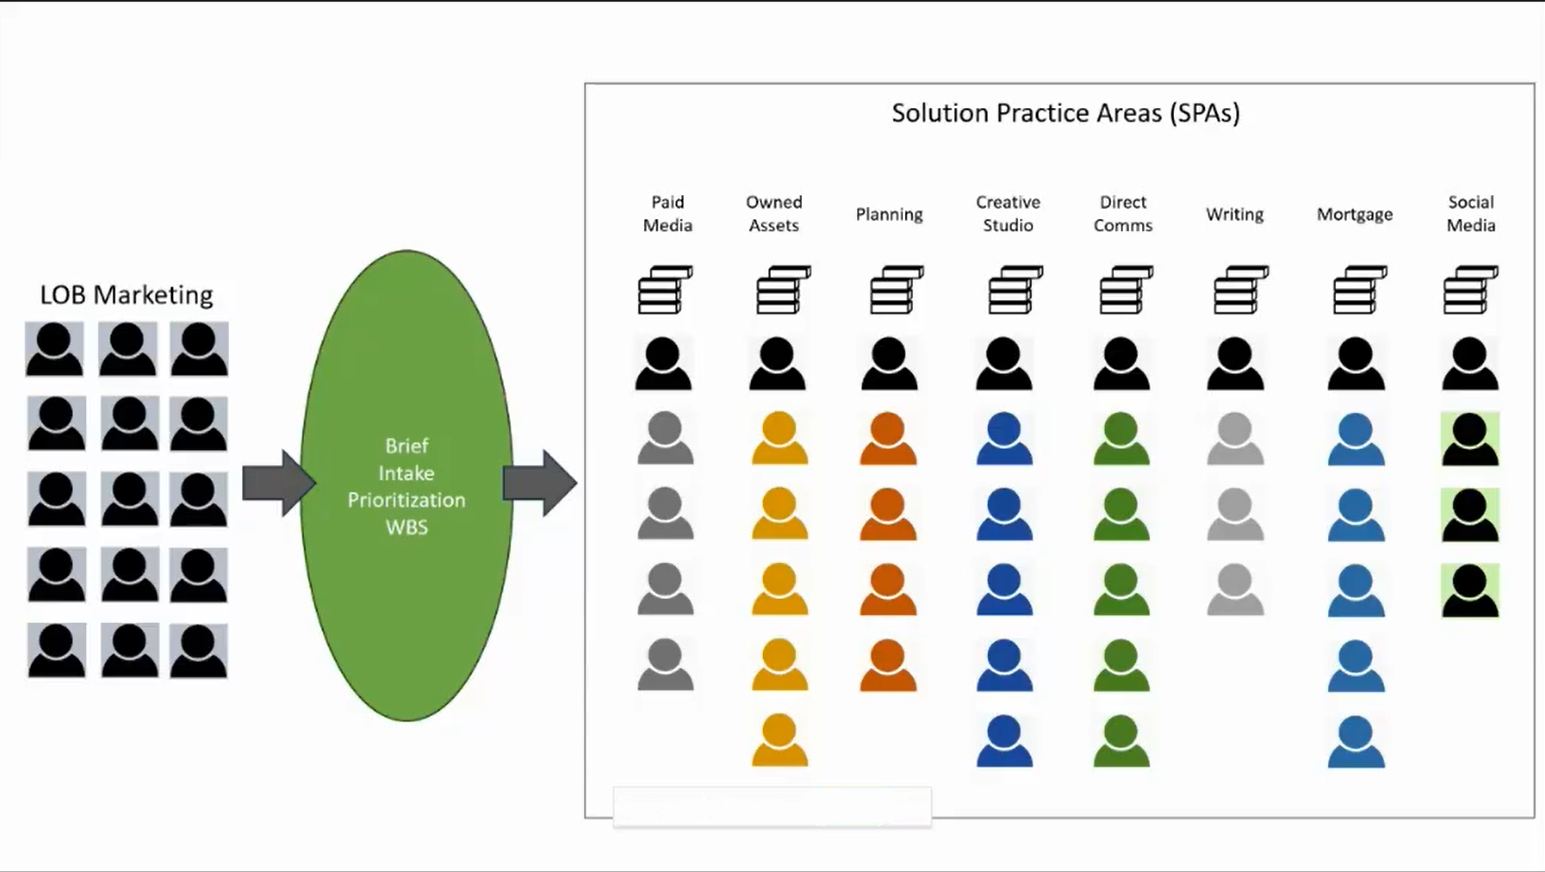 M&T Bank Solution Practice Areas